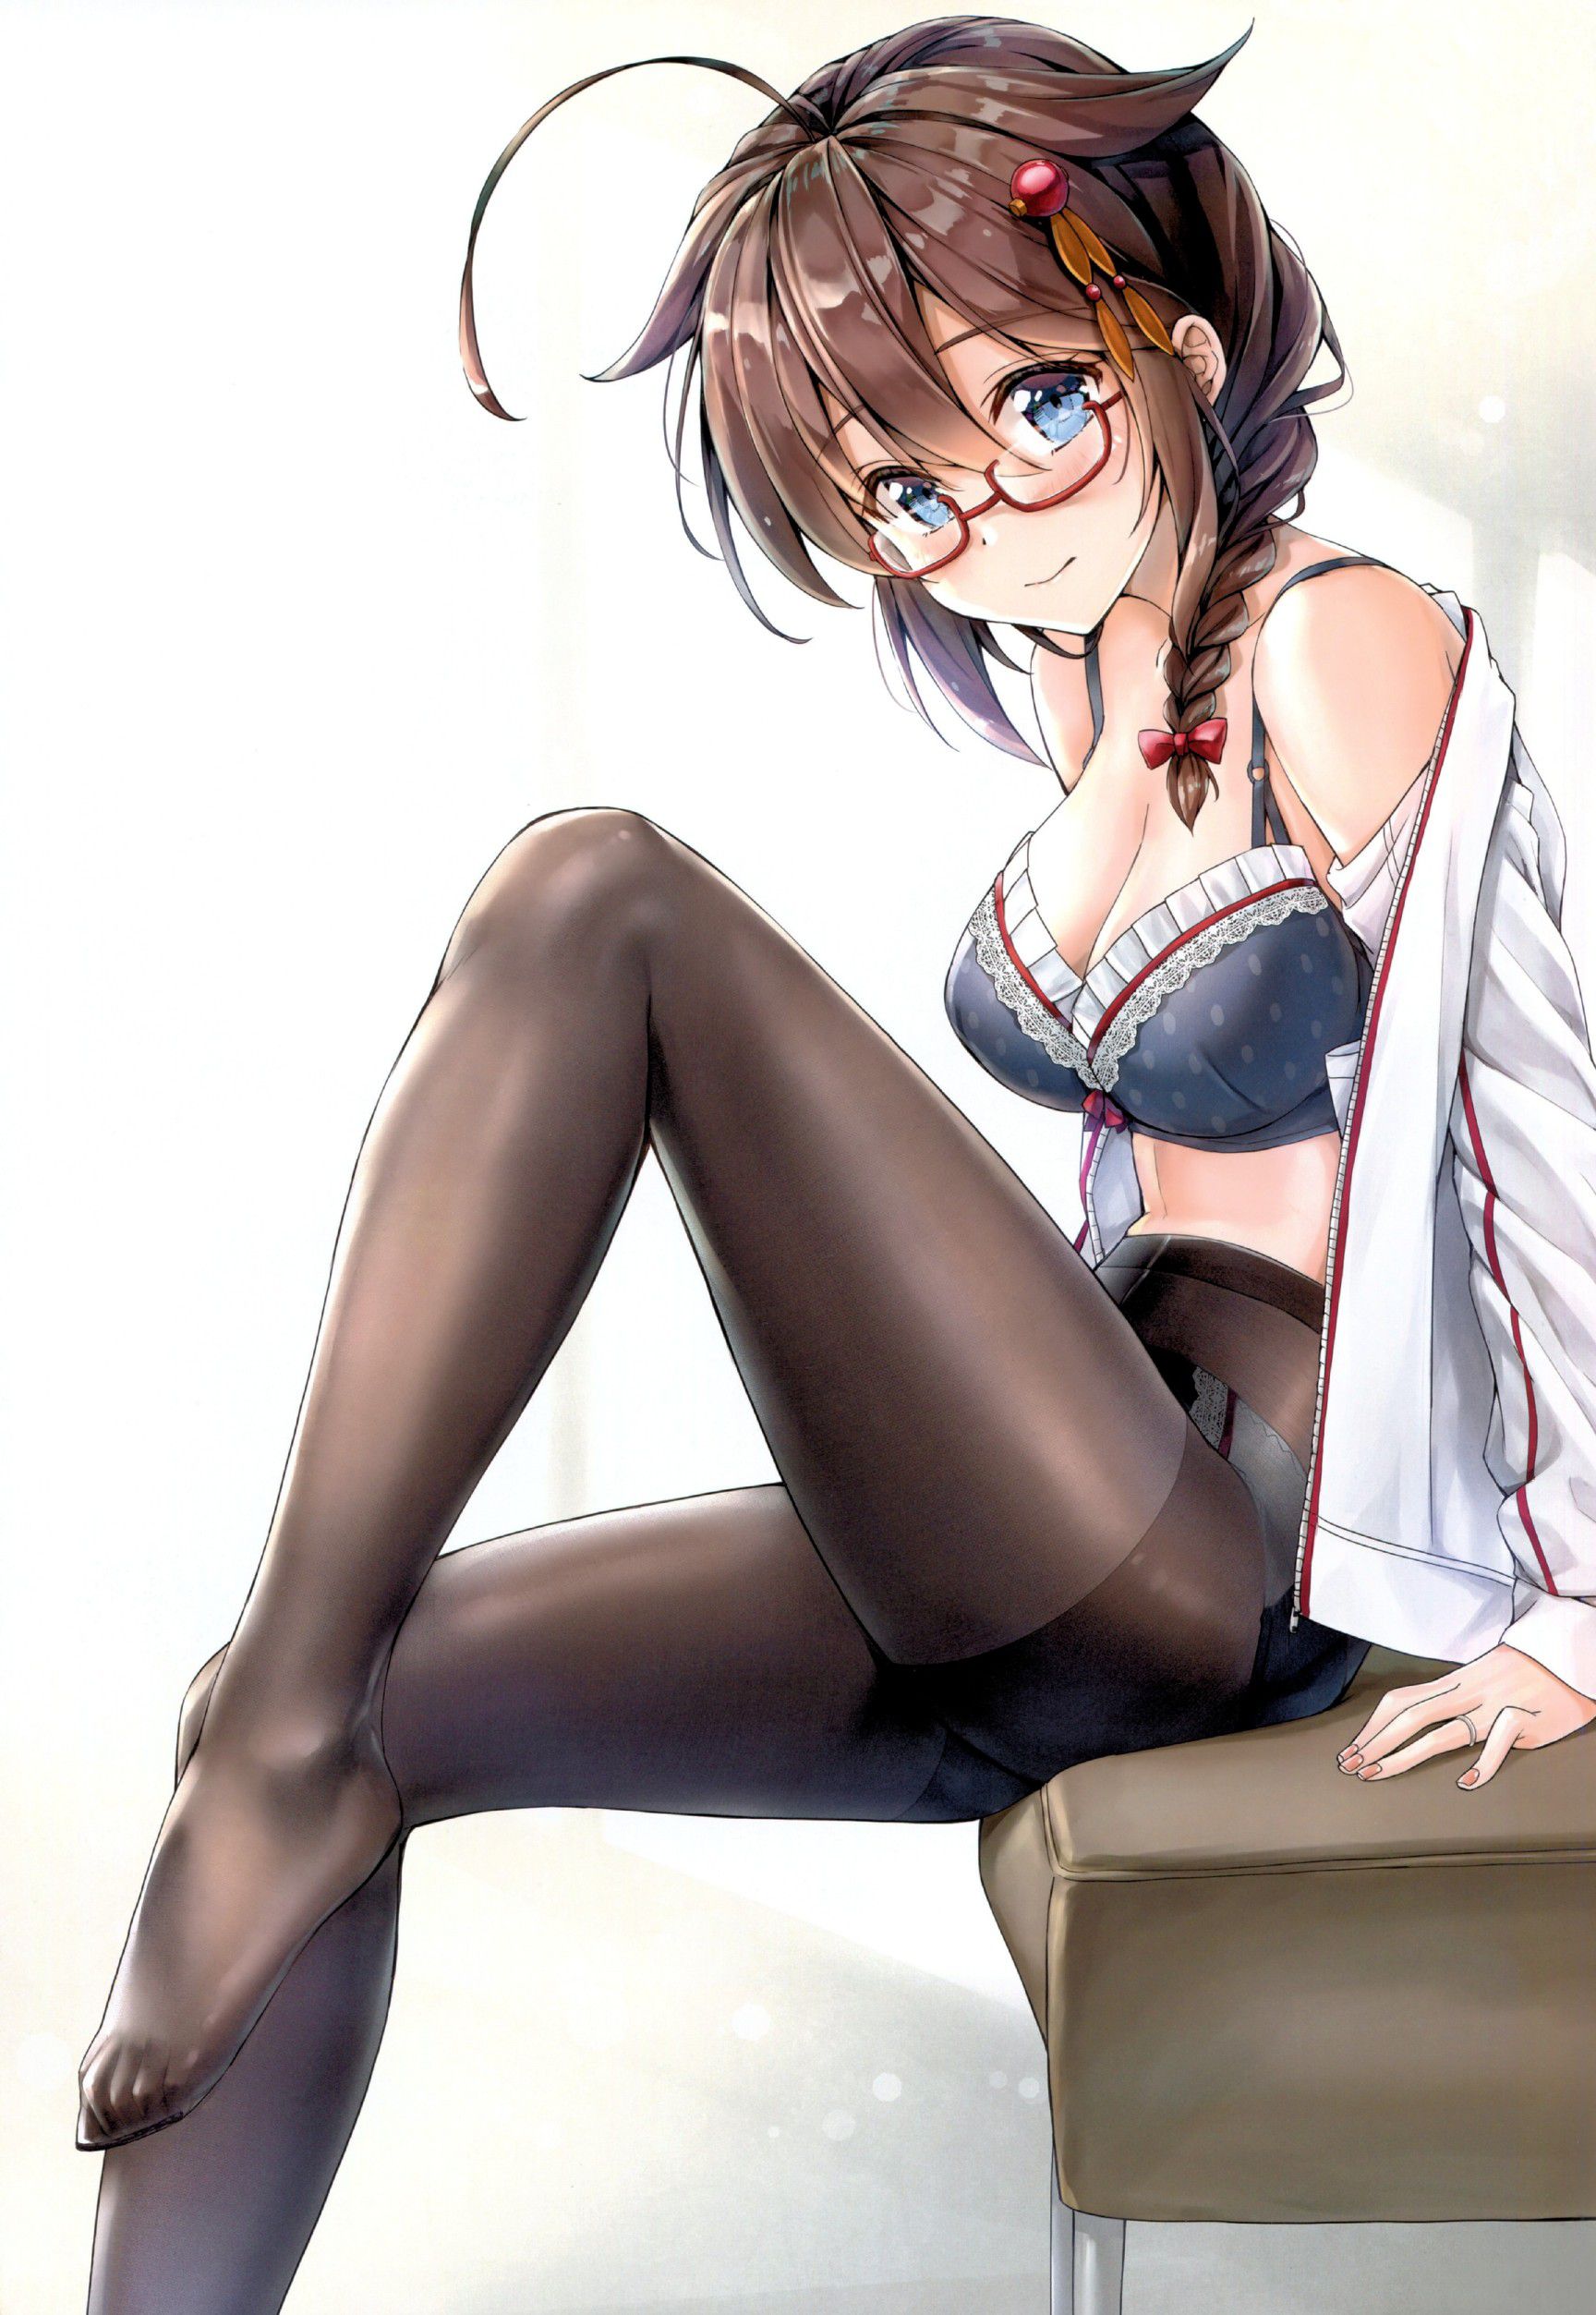 【Secondary erotica】Here is an erotic image where you can worship the etched figure of the glasses girl 31